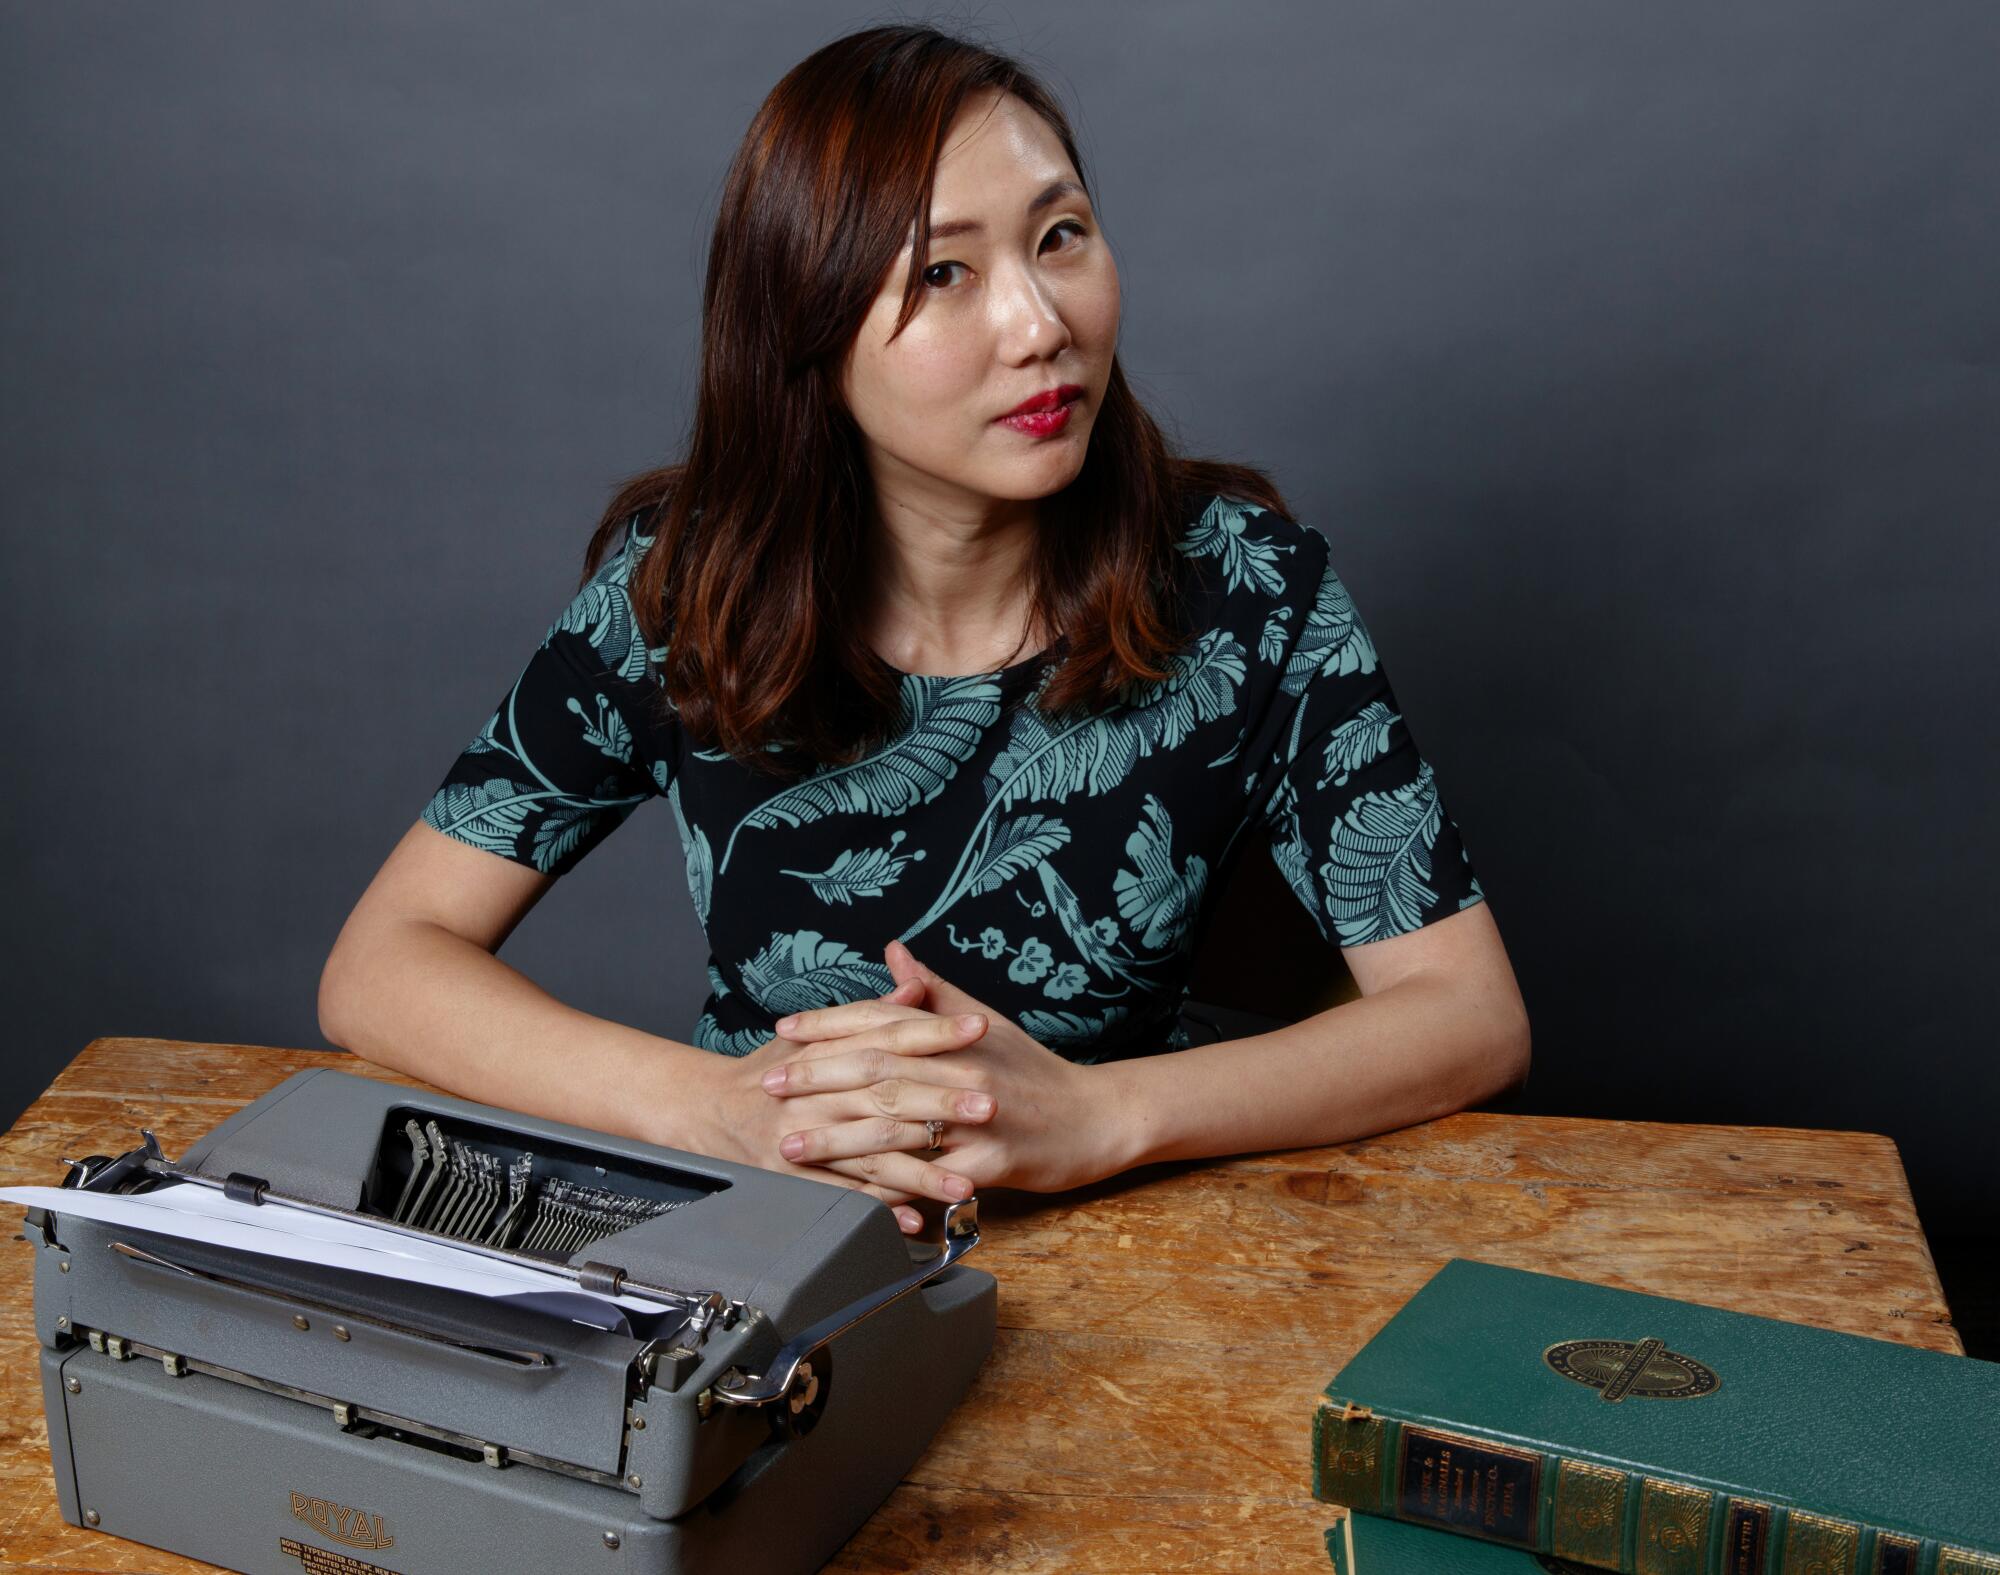 A woman with her hands clasped on a table with a typewriter and books.